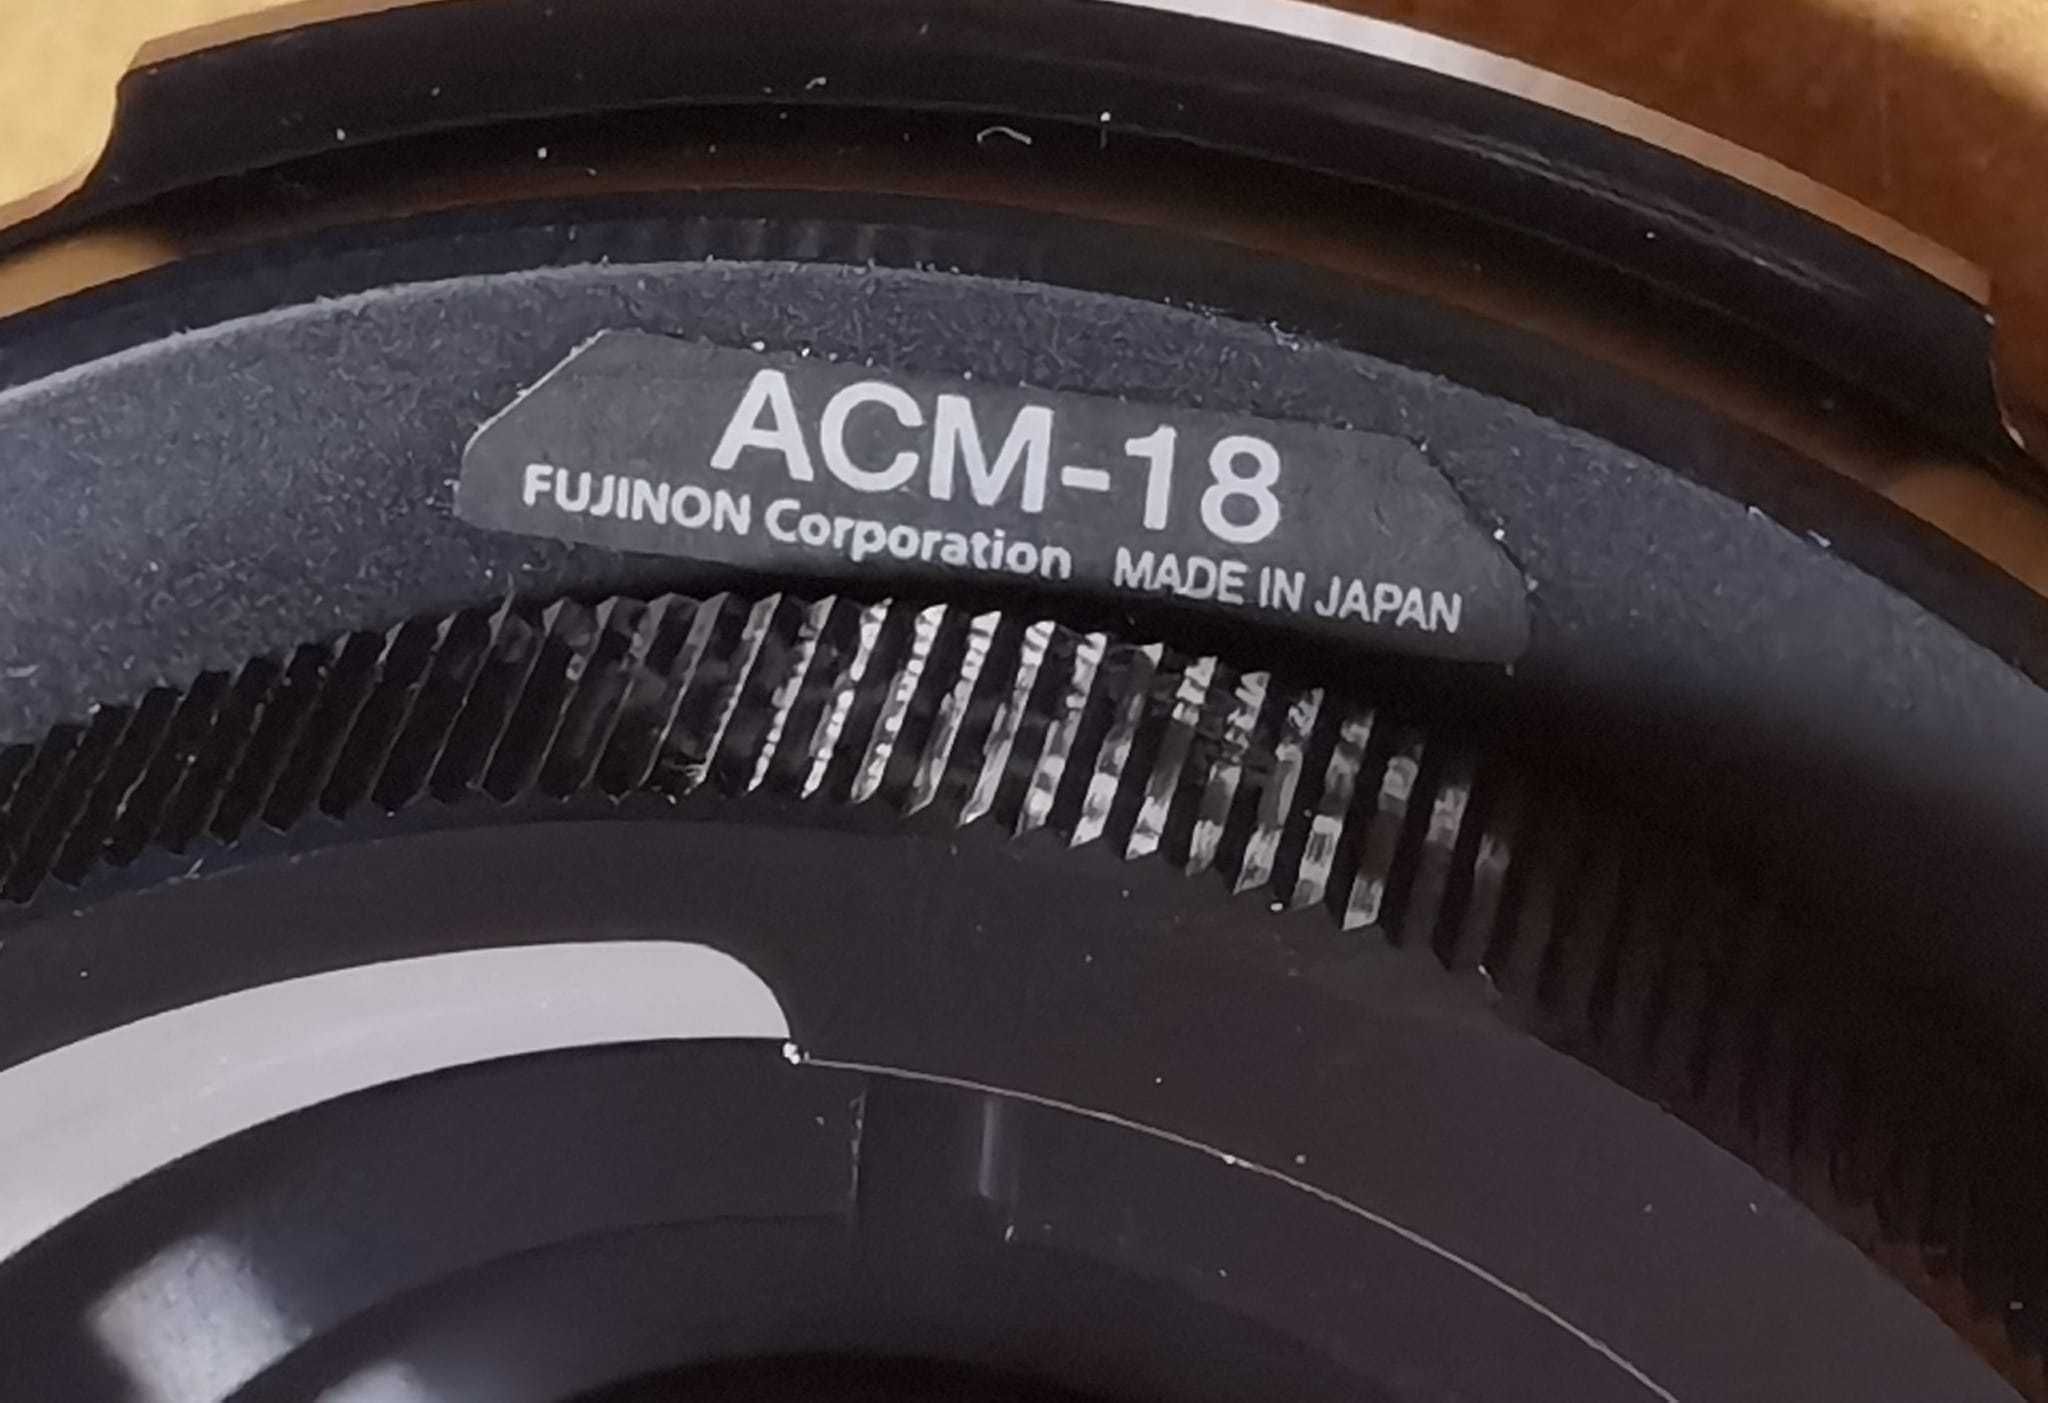 Vand Fujinon ACM-18 1/2" B4 - Lens Adapter for Sony PMW 300 / EX3